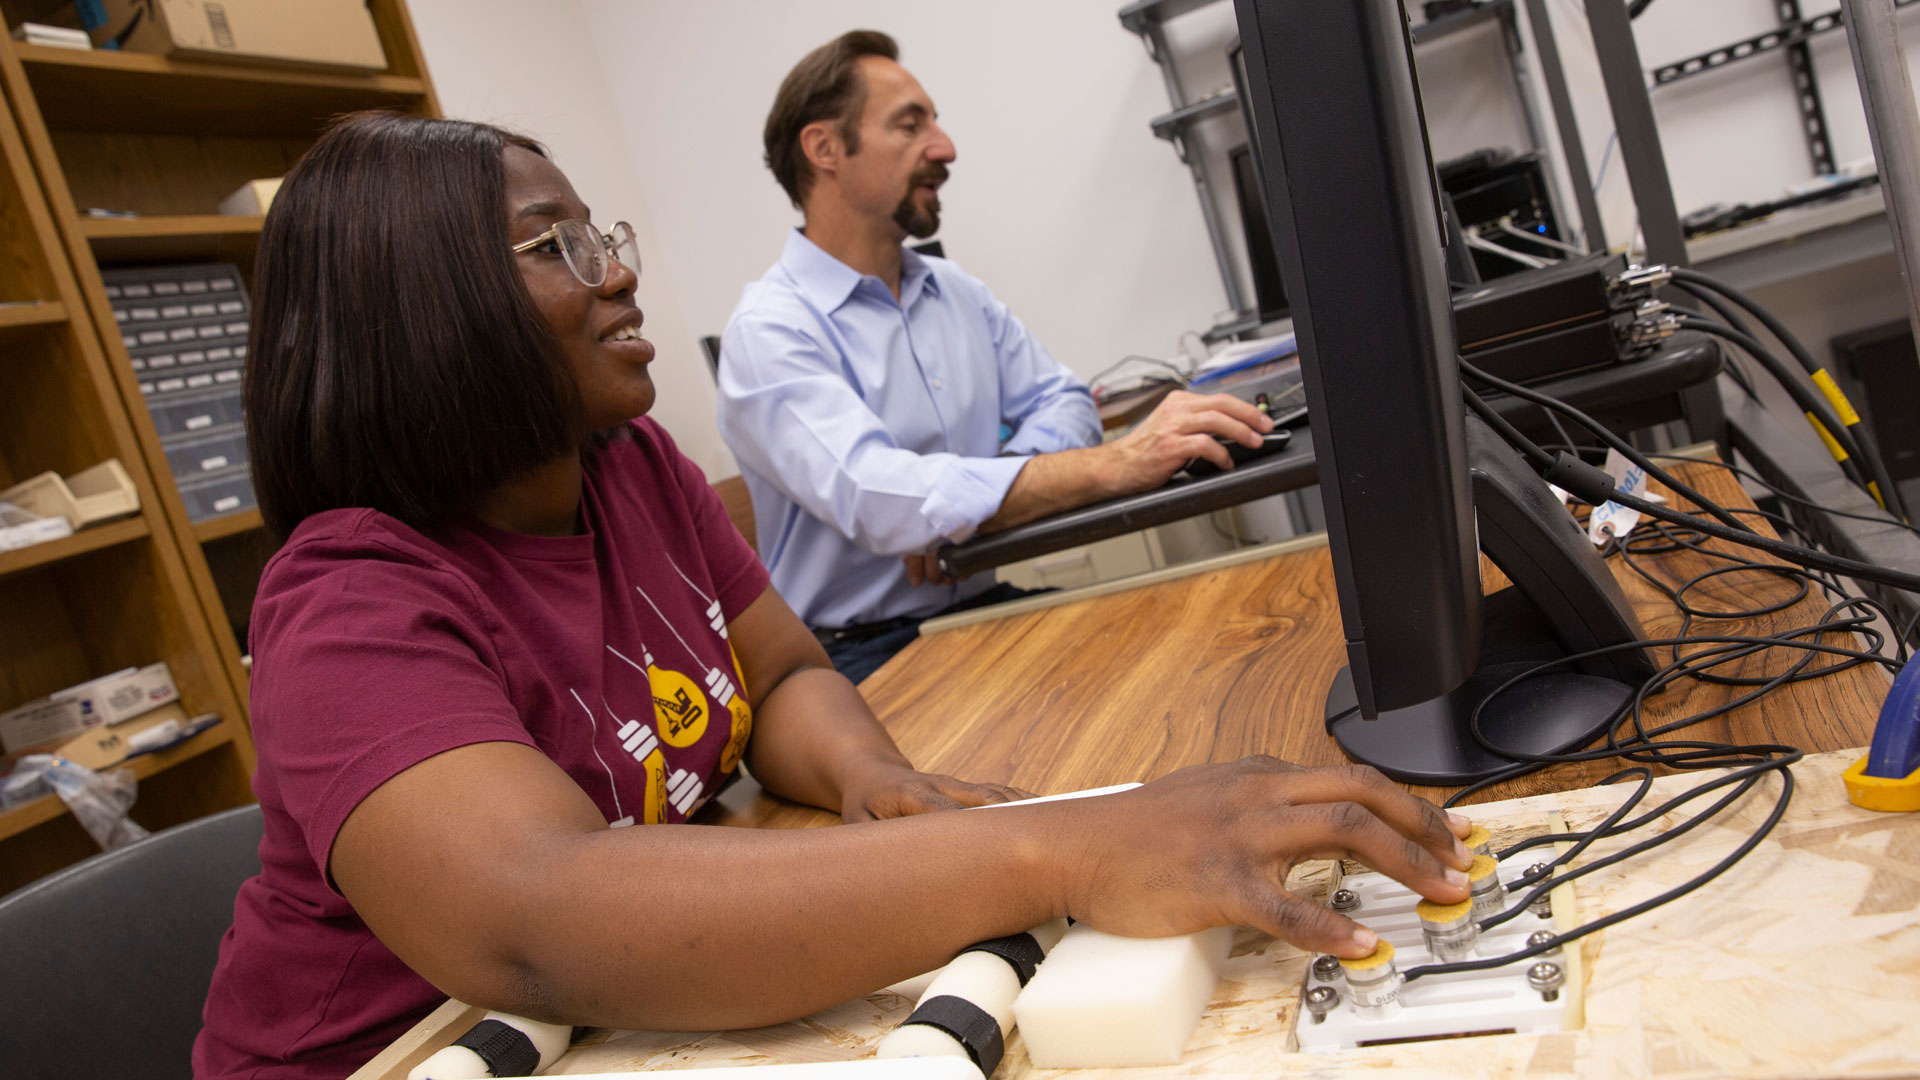 A student and faculty mentor work together on research in a lab.